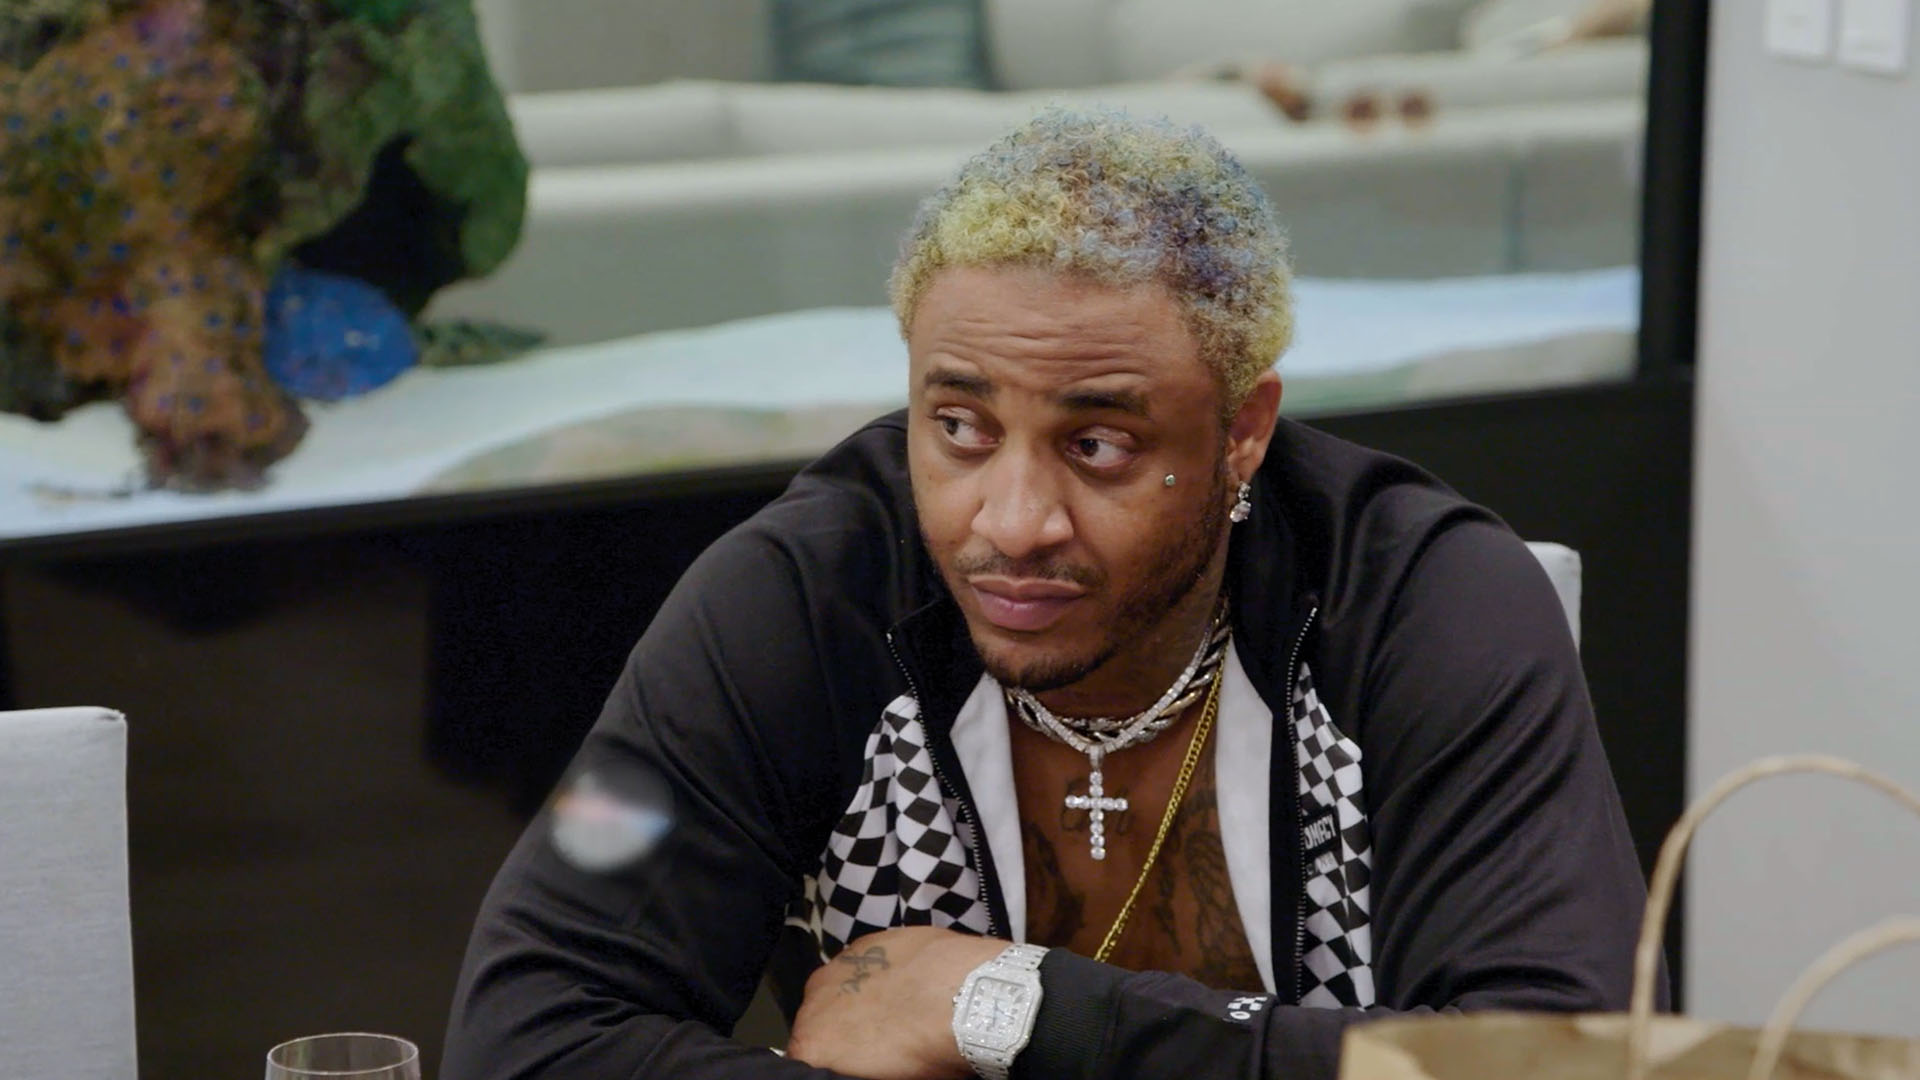 Watch Sneak Peek: Jealousy Reignites a Past Feud | Marriage Boot Camp: Hip Hop Edition Video Extras